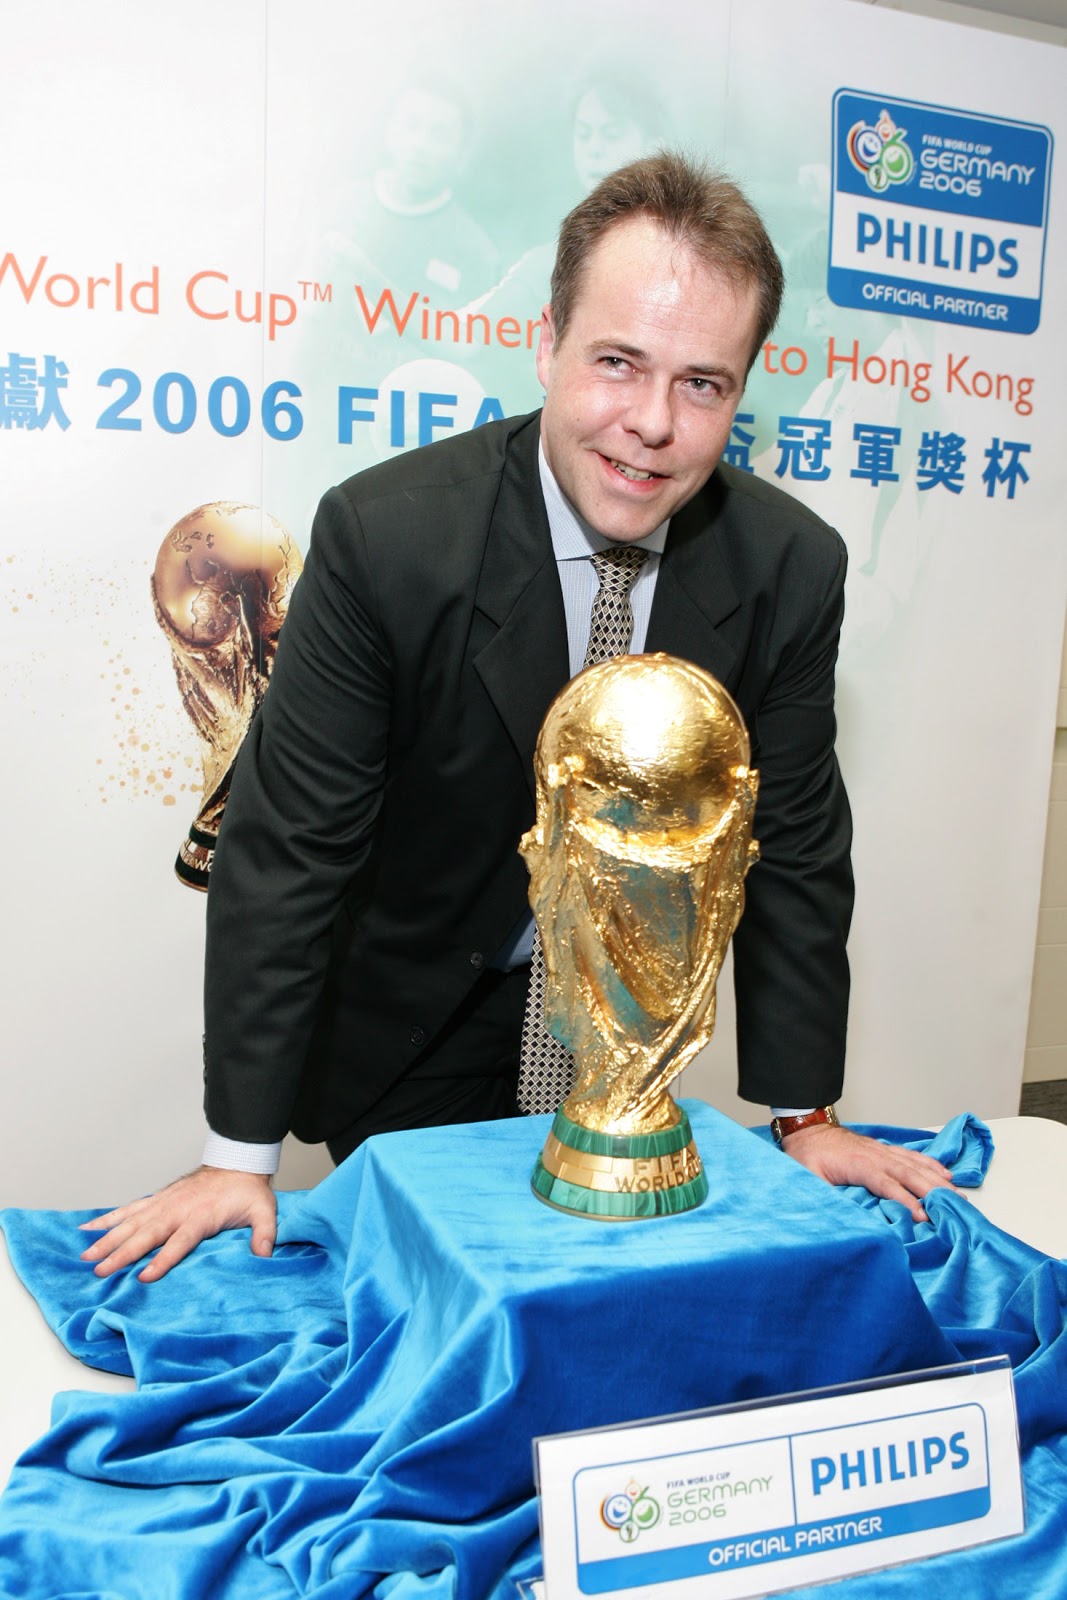 Stefan Kolle and the World Cup